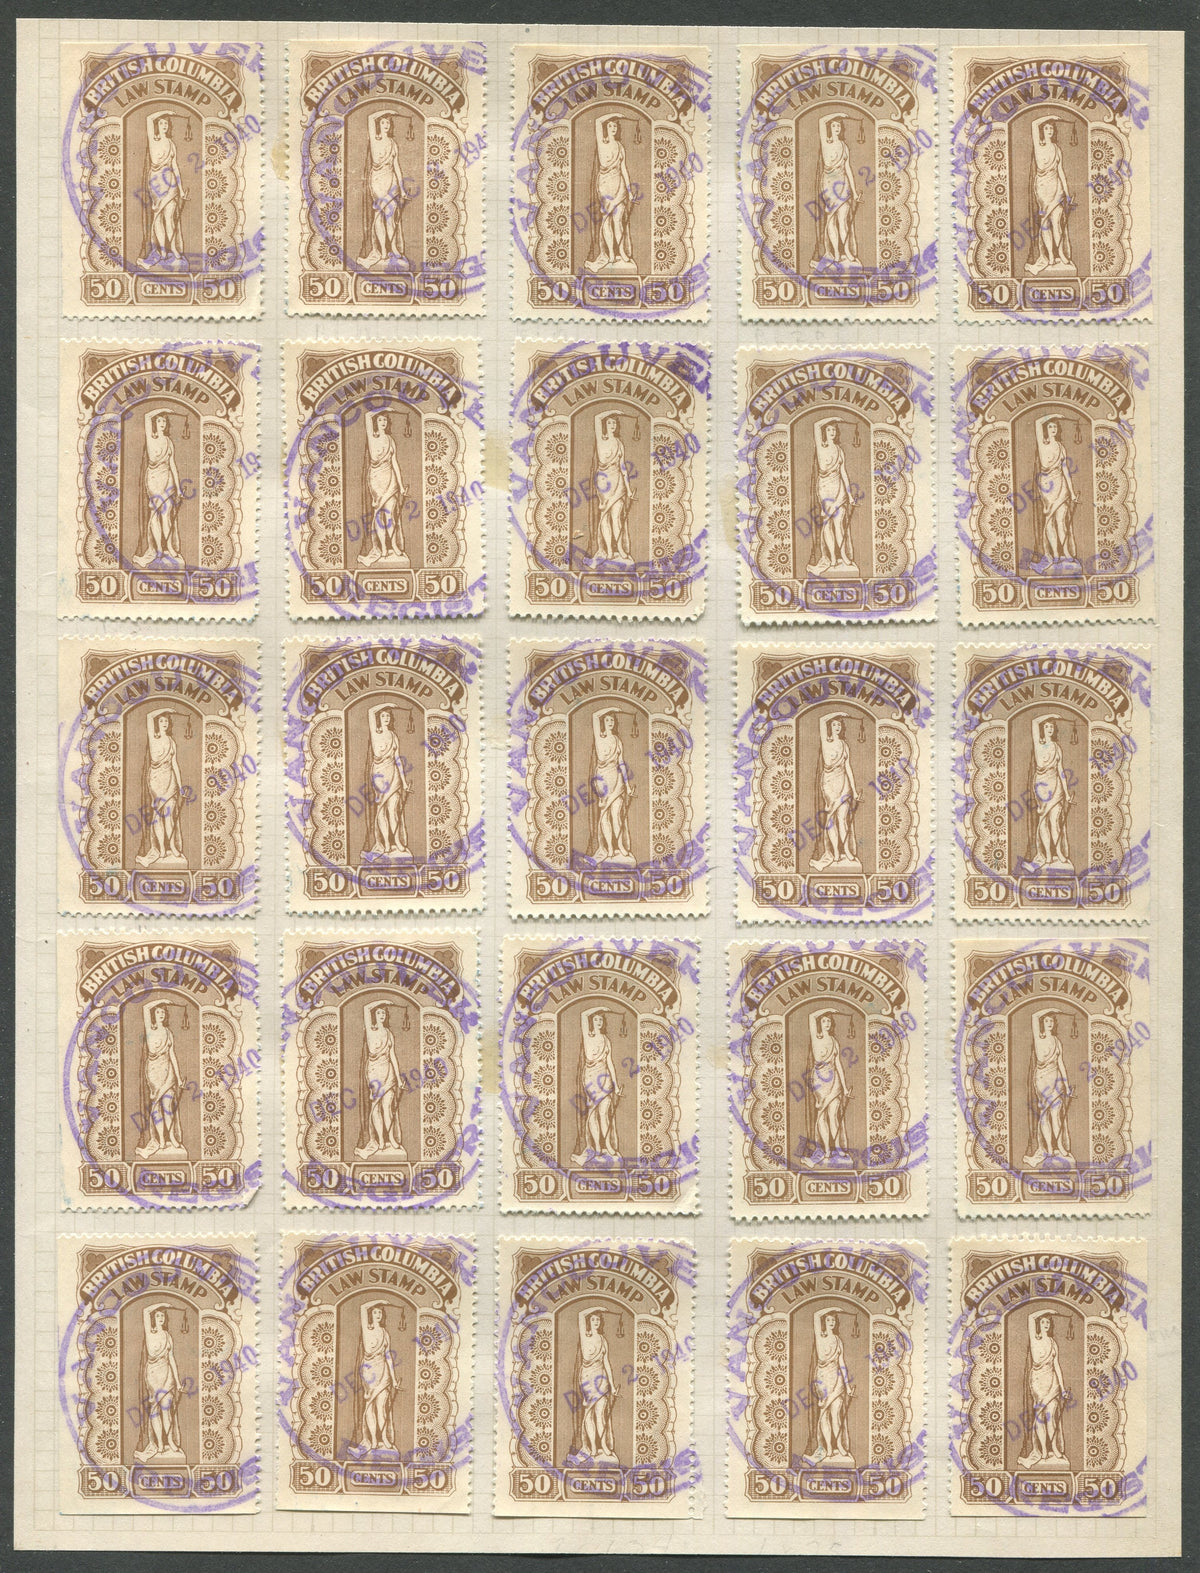 0034BC2010 - BCL34 - Used Reconstructed Sheet